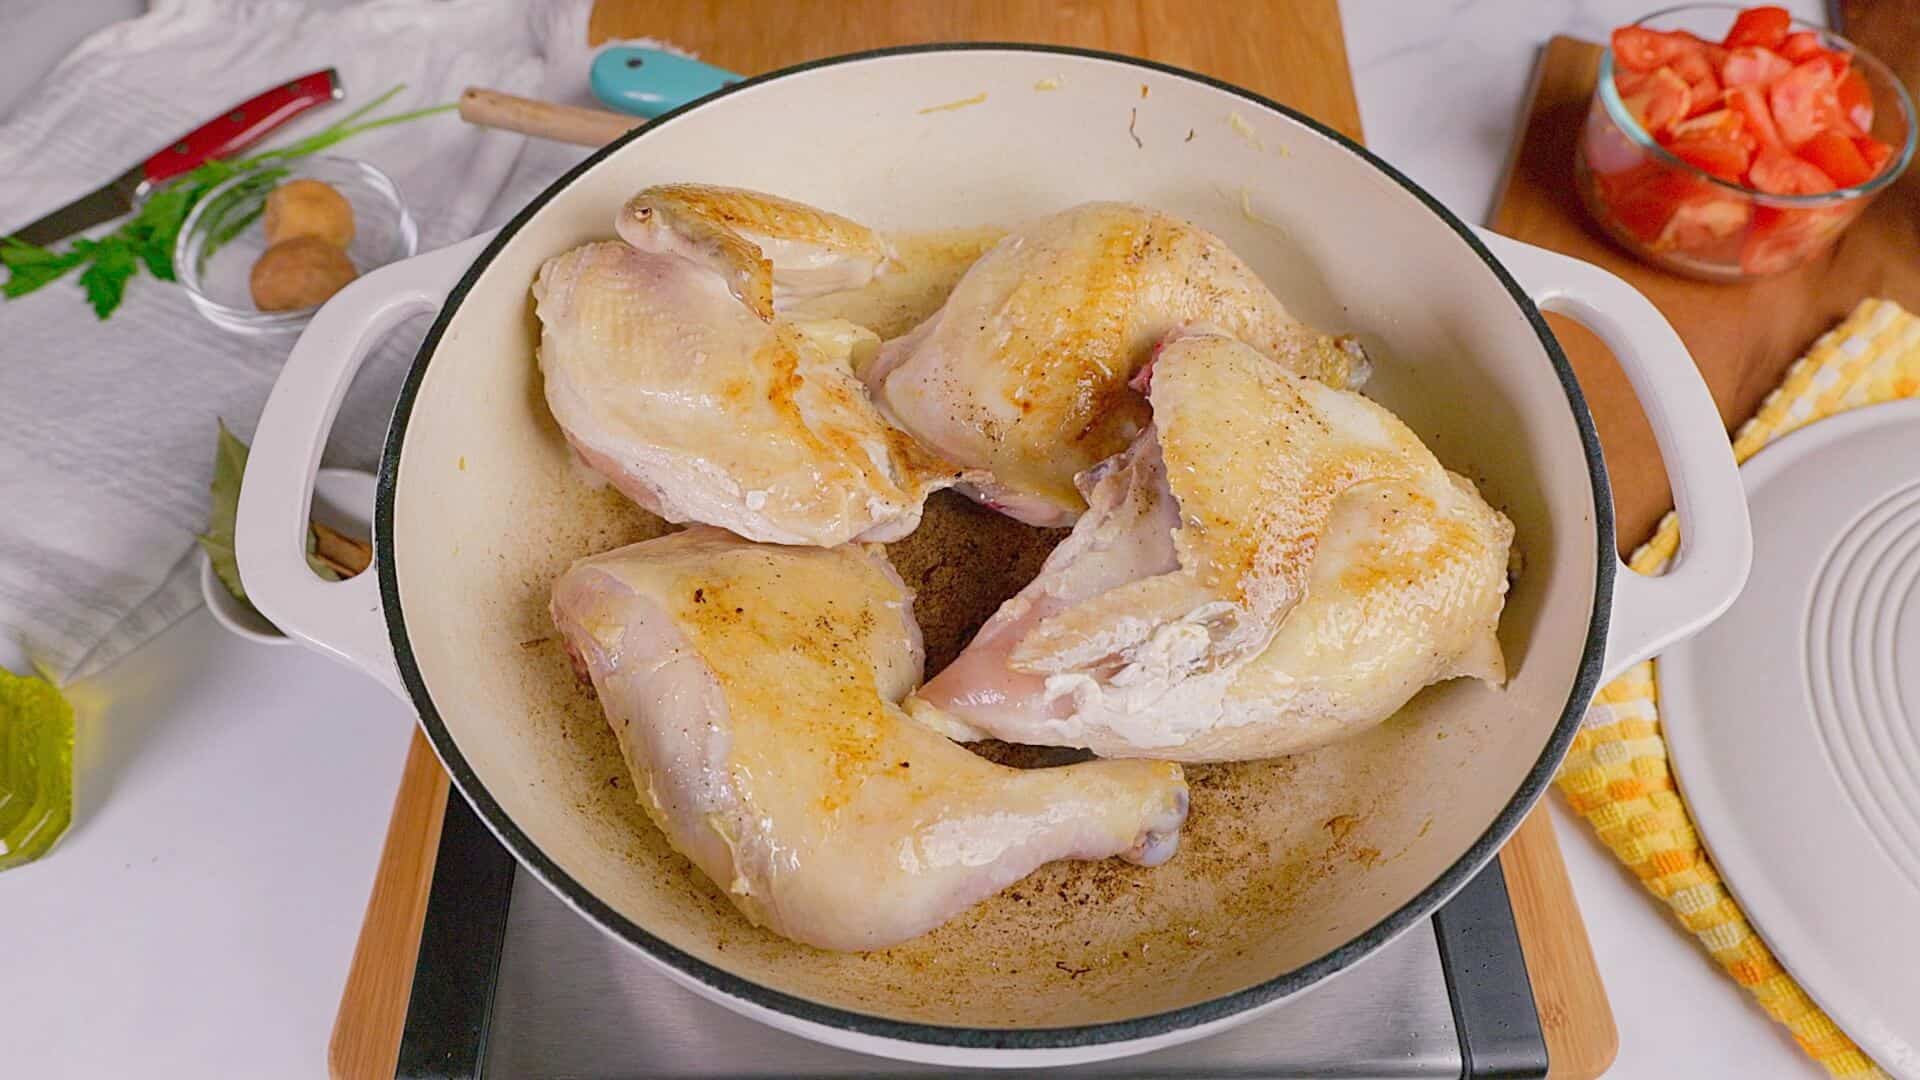 Searing chicken for the recipe.